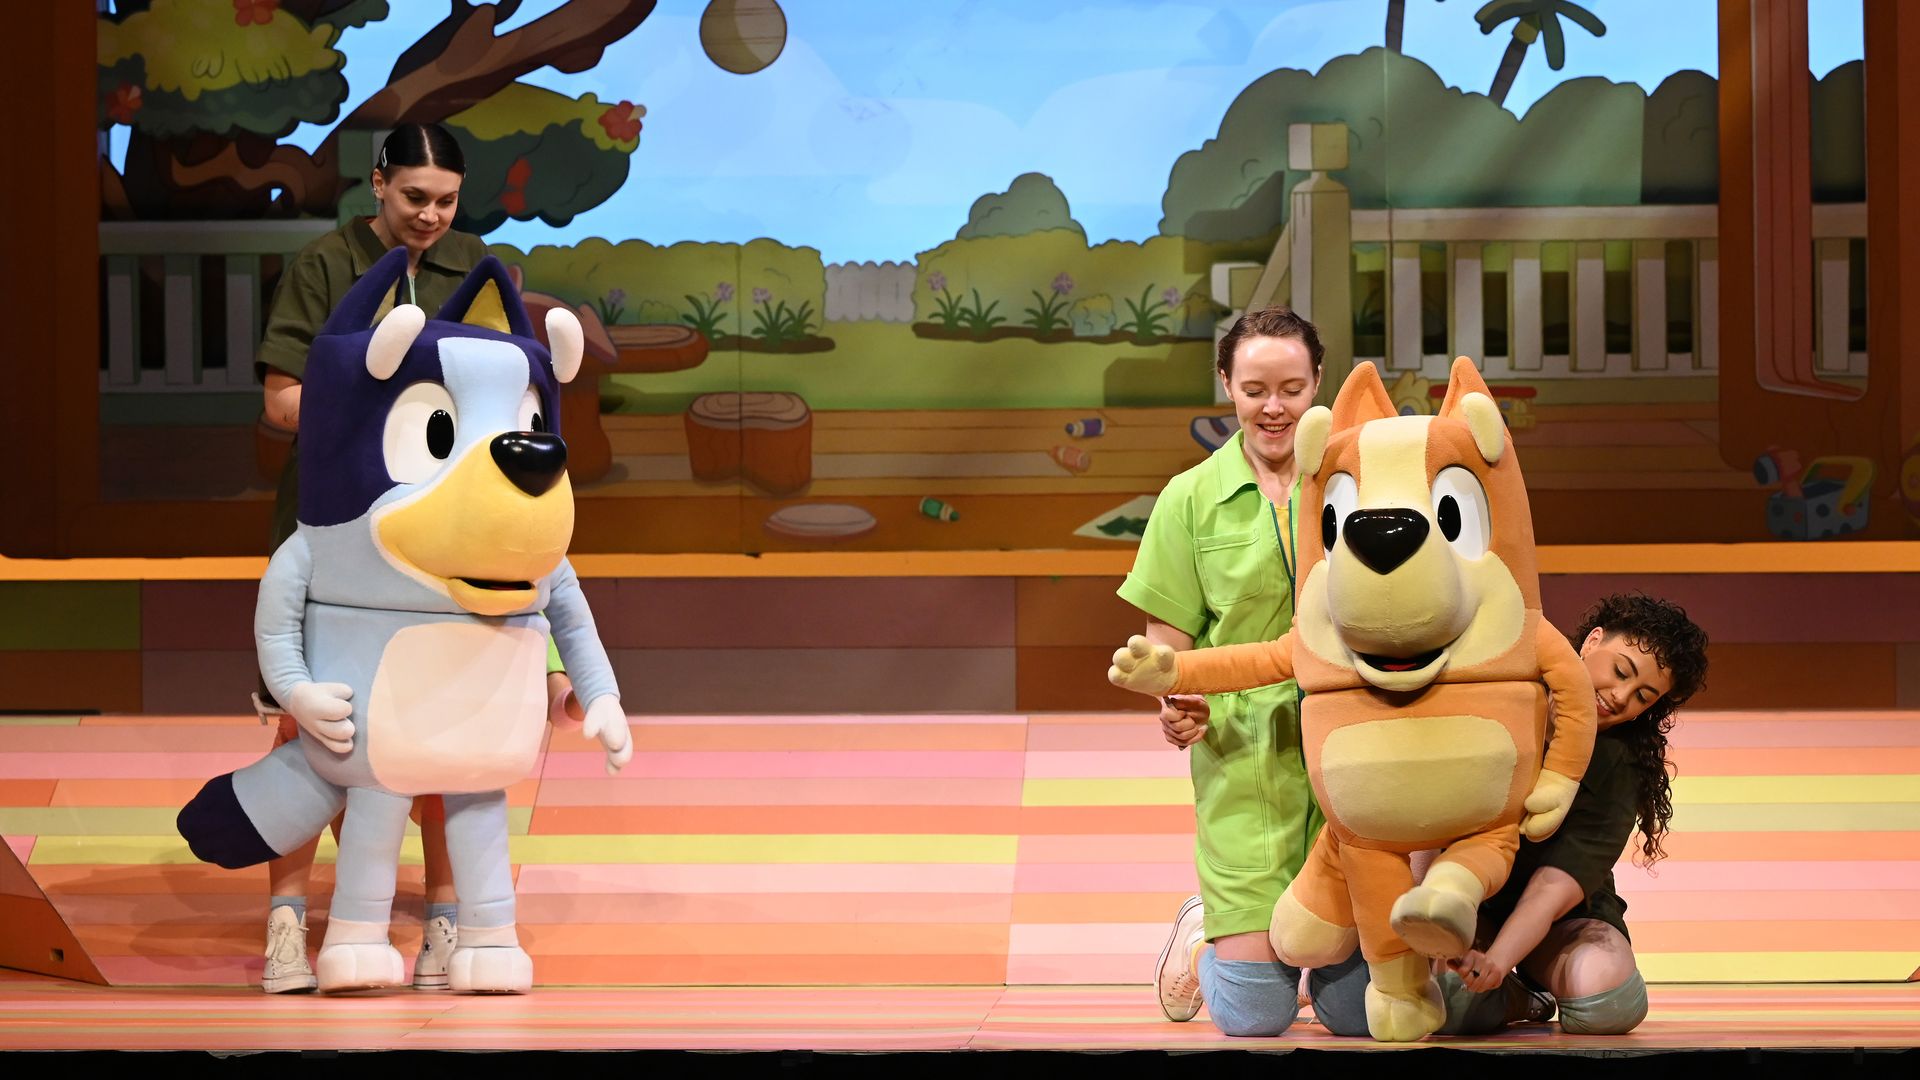 Stuffed characters from "Bluey's Big Play" perform alongside human counterparts onstage.